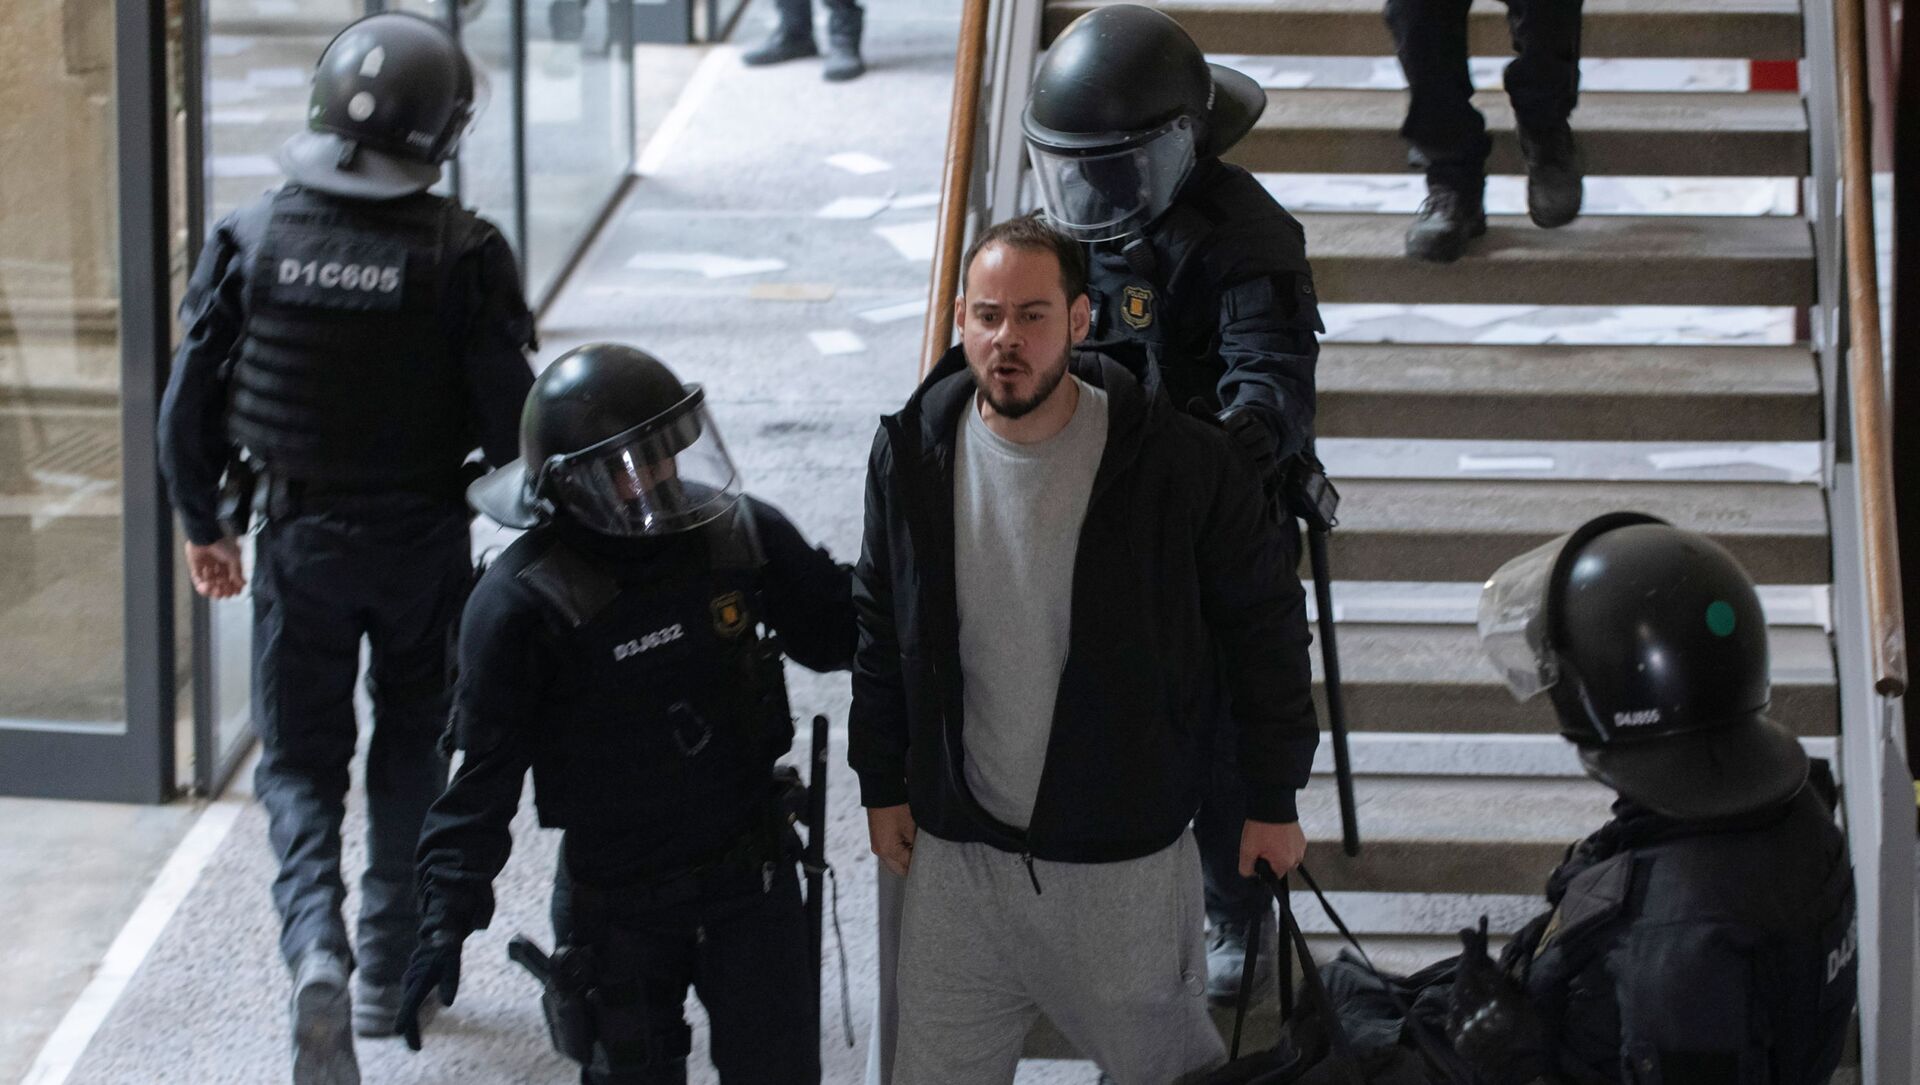 Spanish rapper Pablo Hasel reacts as he is detained by riot police inside the University of Lleida, after he was sentenced to jail time on charges including insulting the monarchy and glorifying terrorism, in Lleida, Spain February 16, 2021. - Sputnik International, 1920, 16.02.2021